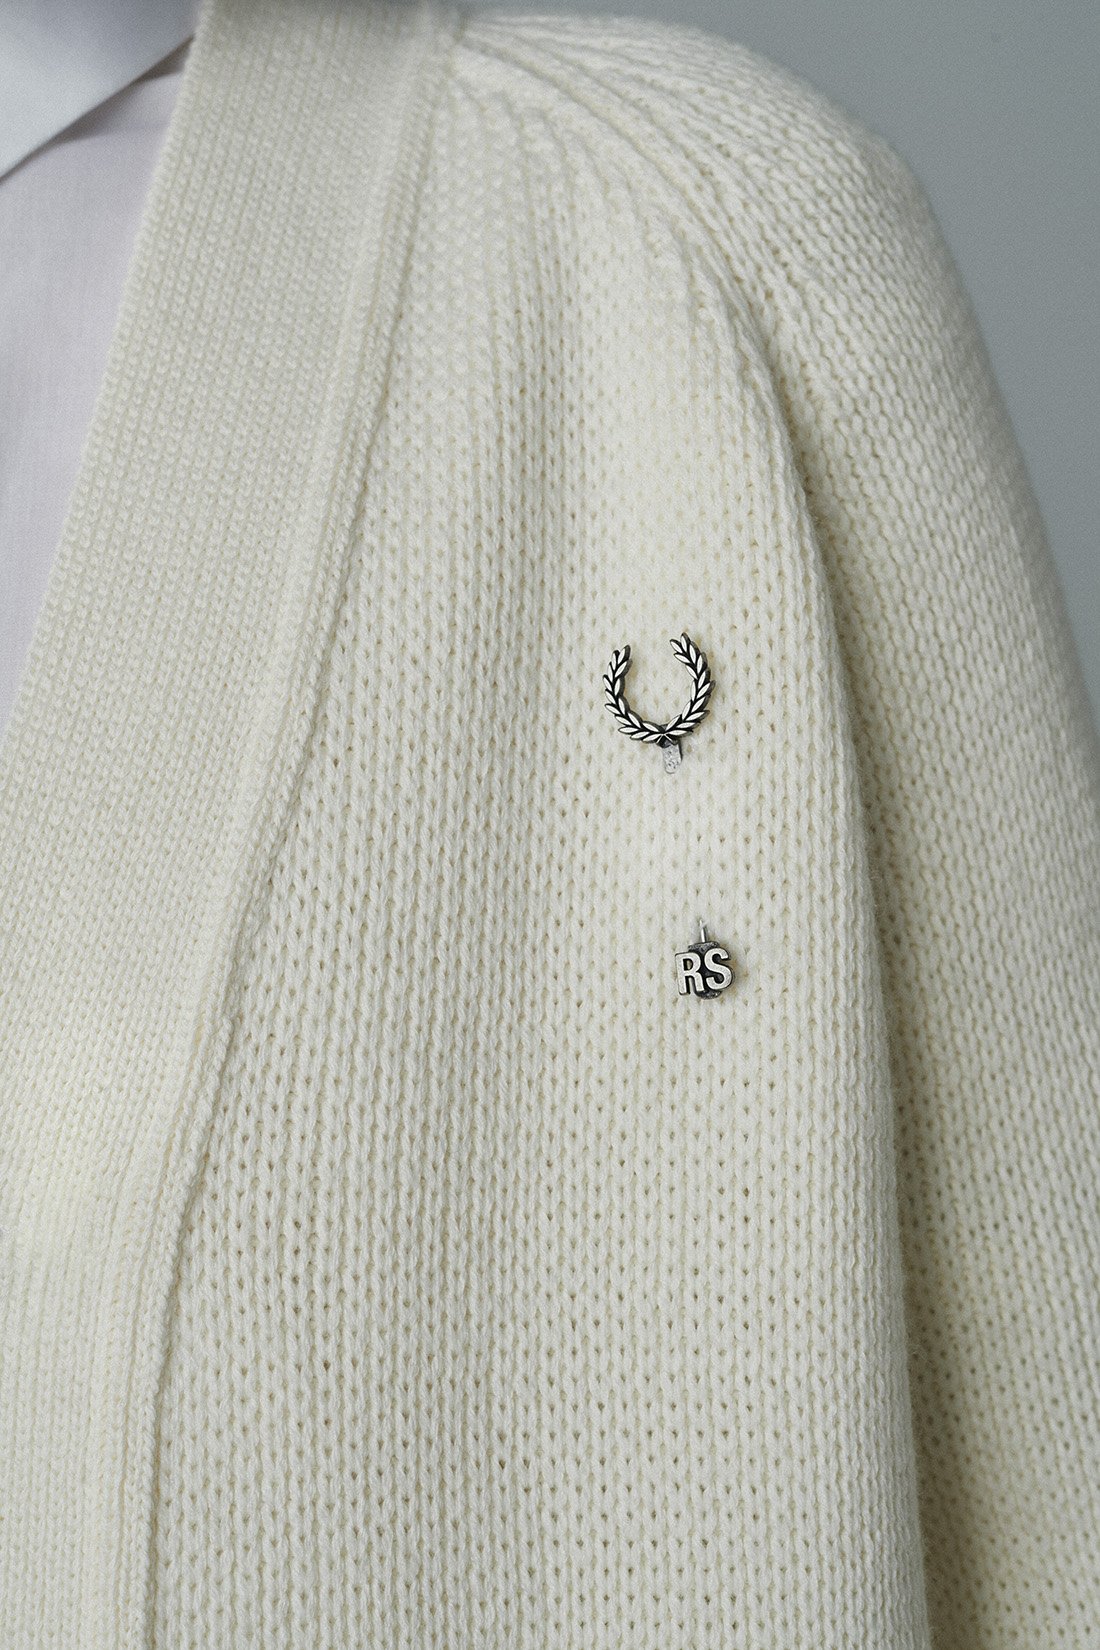 Fred Perry x Raf Simons Automne-Hiver 2020-2021